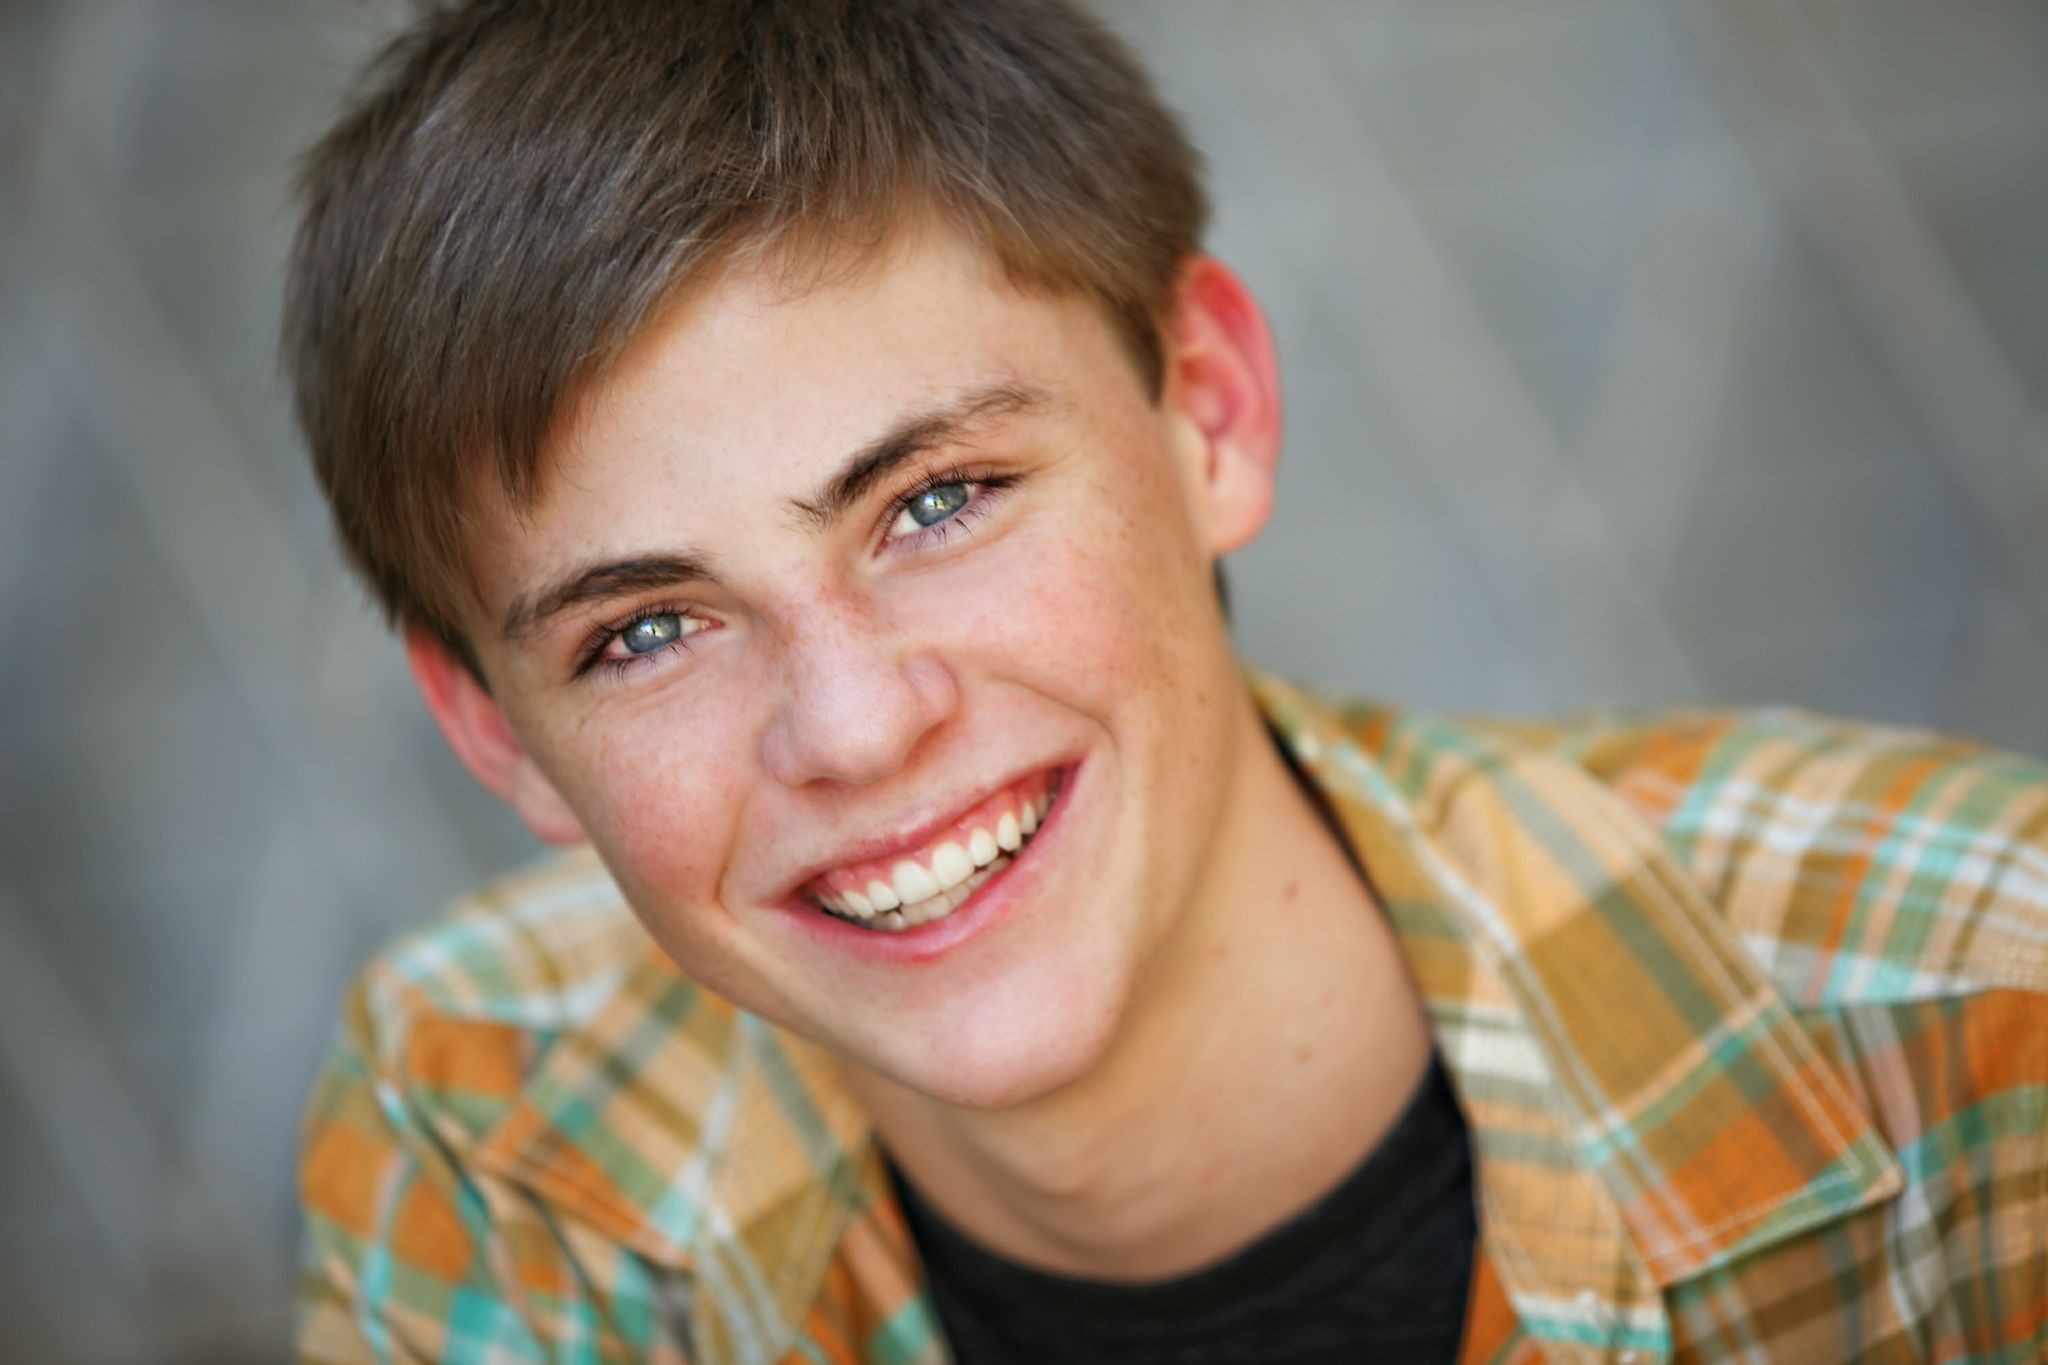 John Henry Bowles was born on January 18, 2000 in Kendall Florida. His first role was Walker in the film 